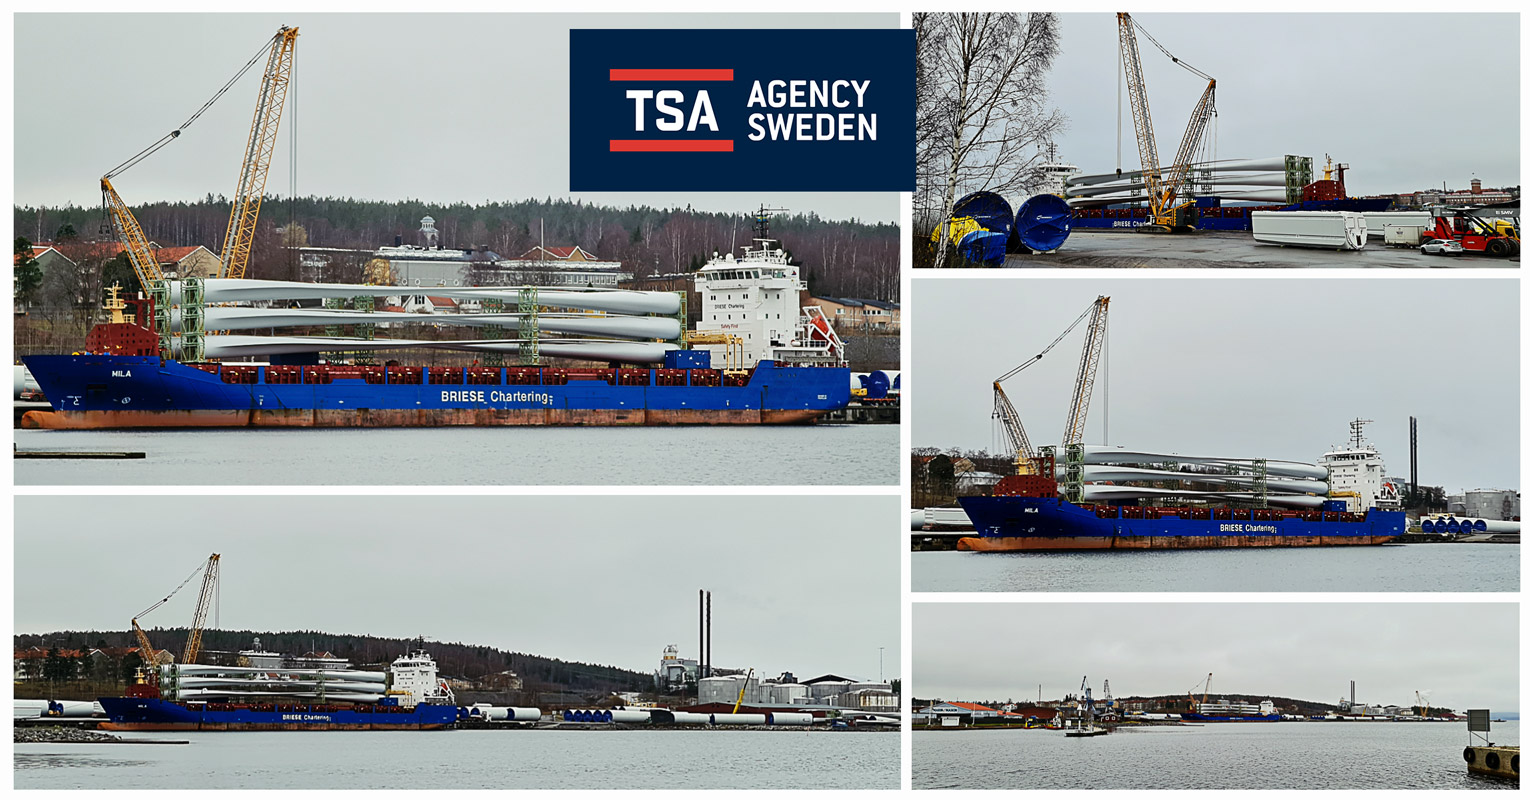 TSA Agency Sweden Handled a Smaller Project Cargo Vessel Loaded with Blades at port of Harnosand, 400 km North of Stockholm